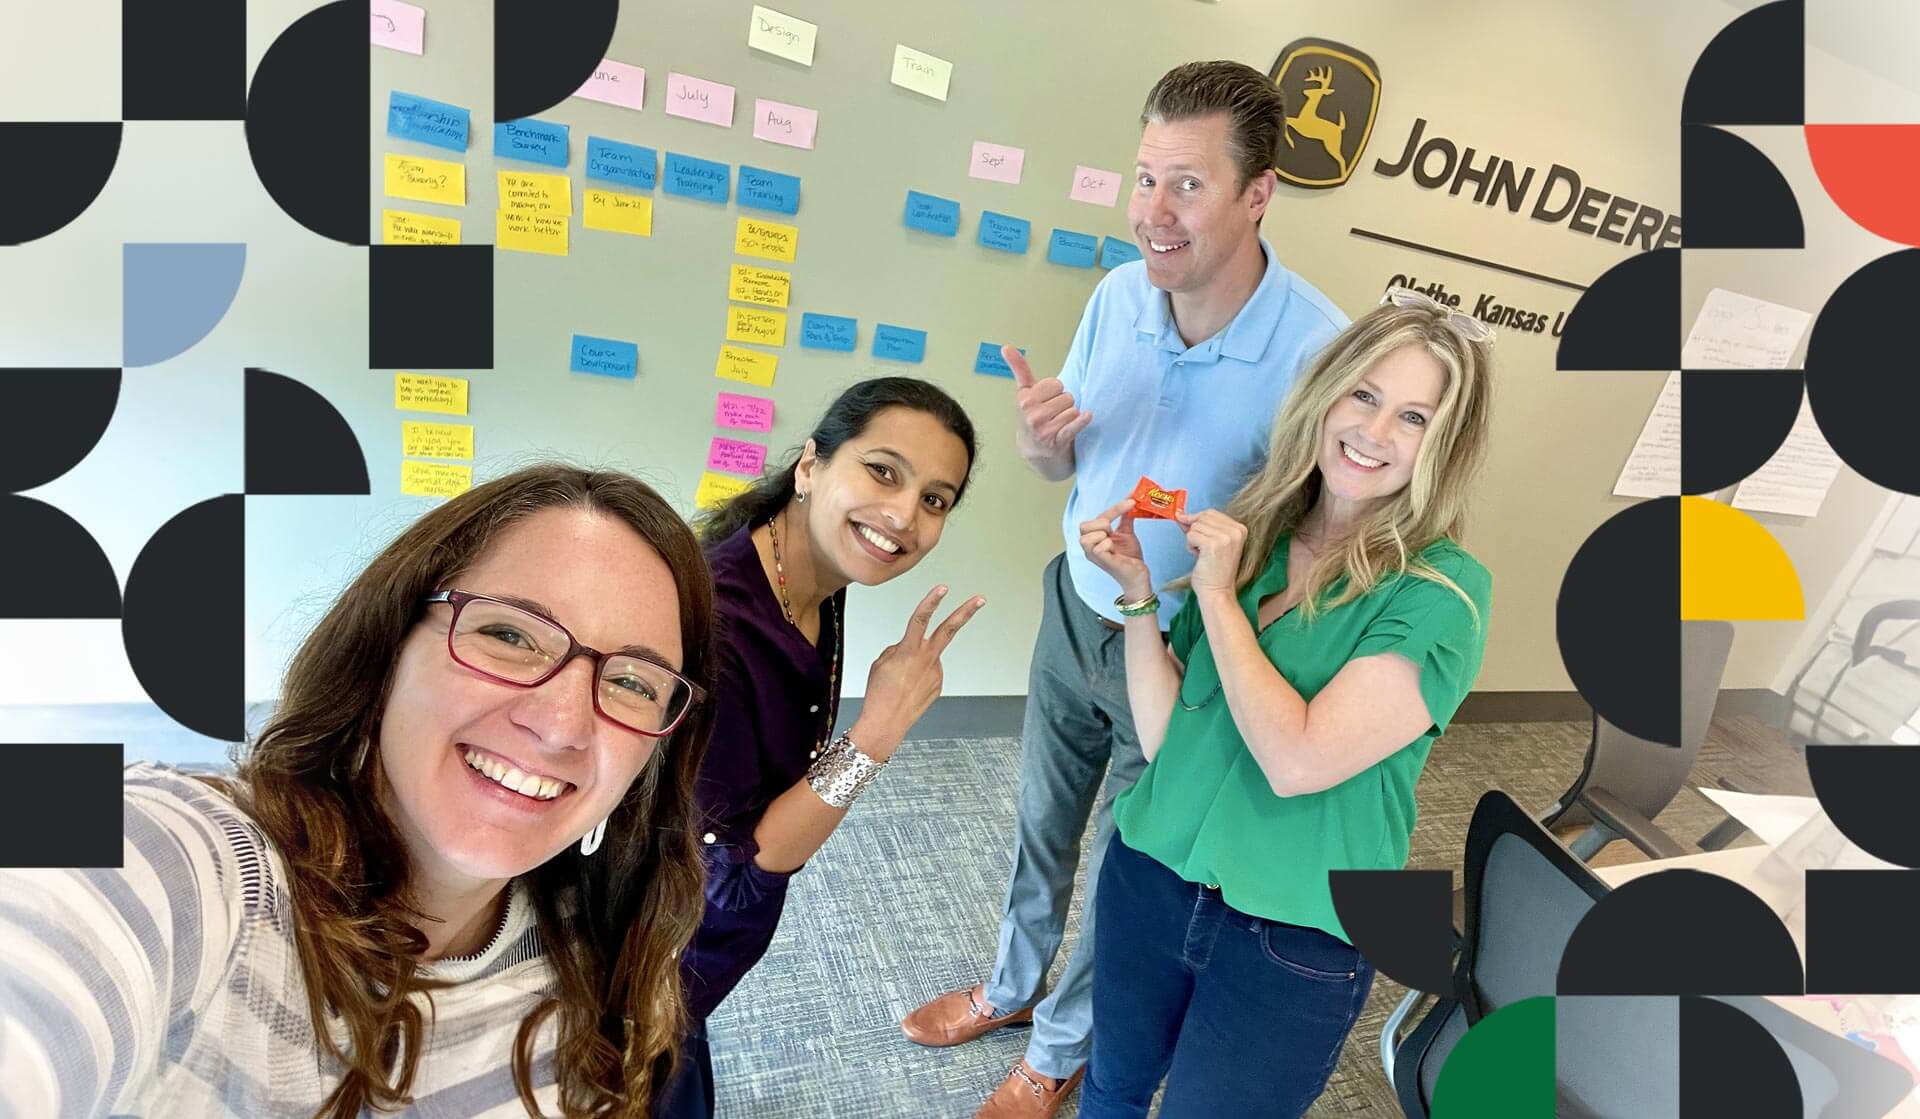 Amanda Hembree with people from a John Deere training session standing in front of a wall of post-it notes – all smiling and looking at the camera